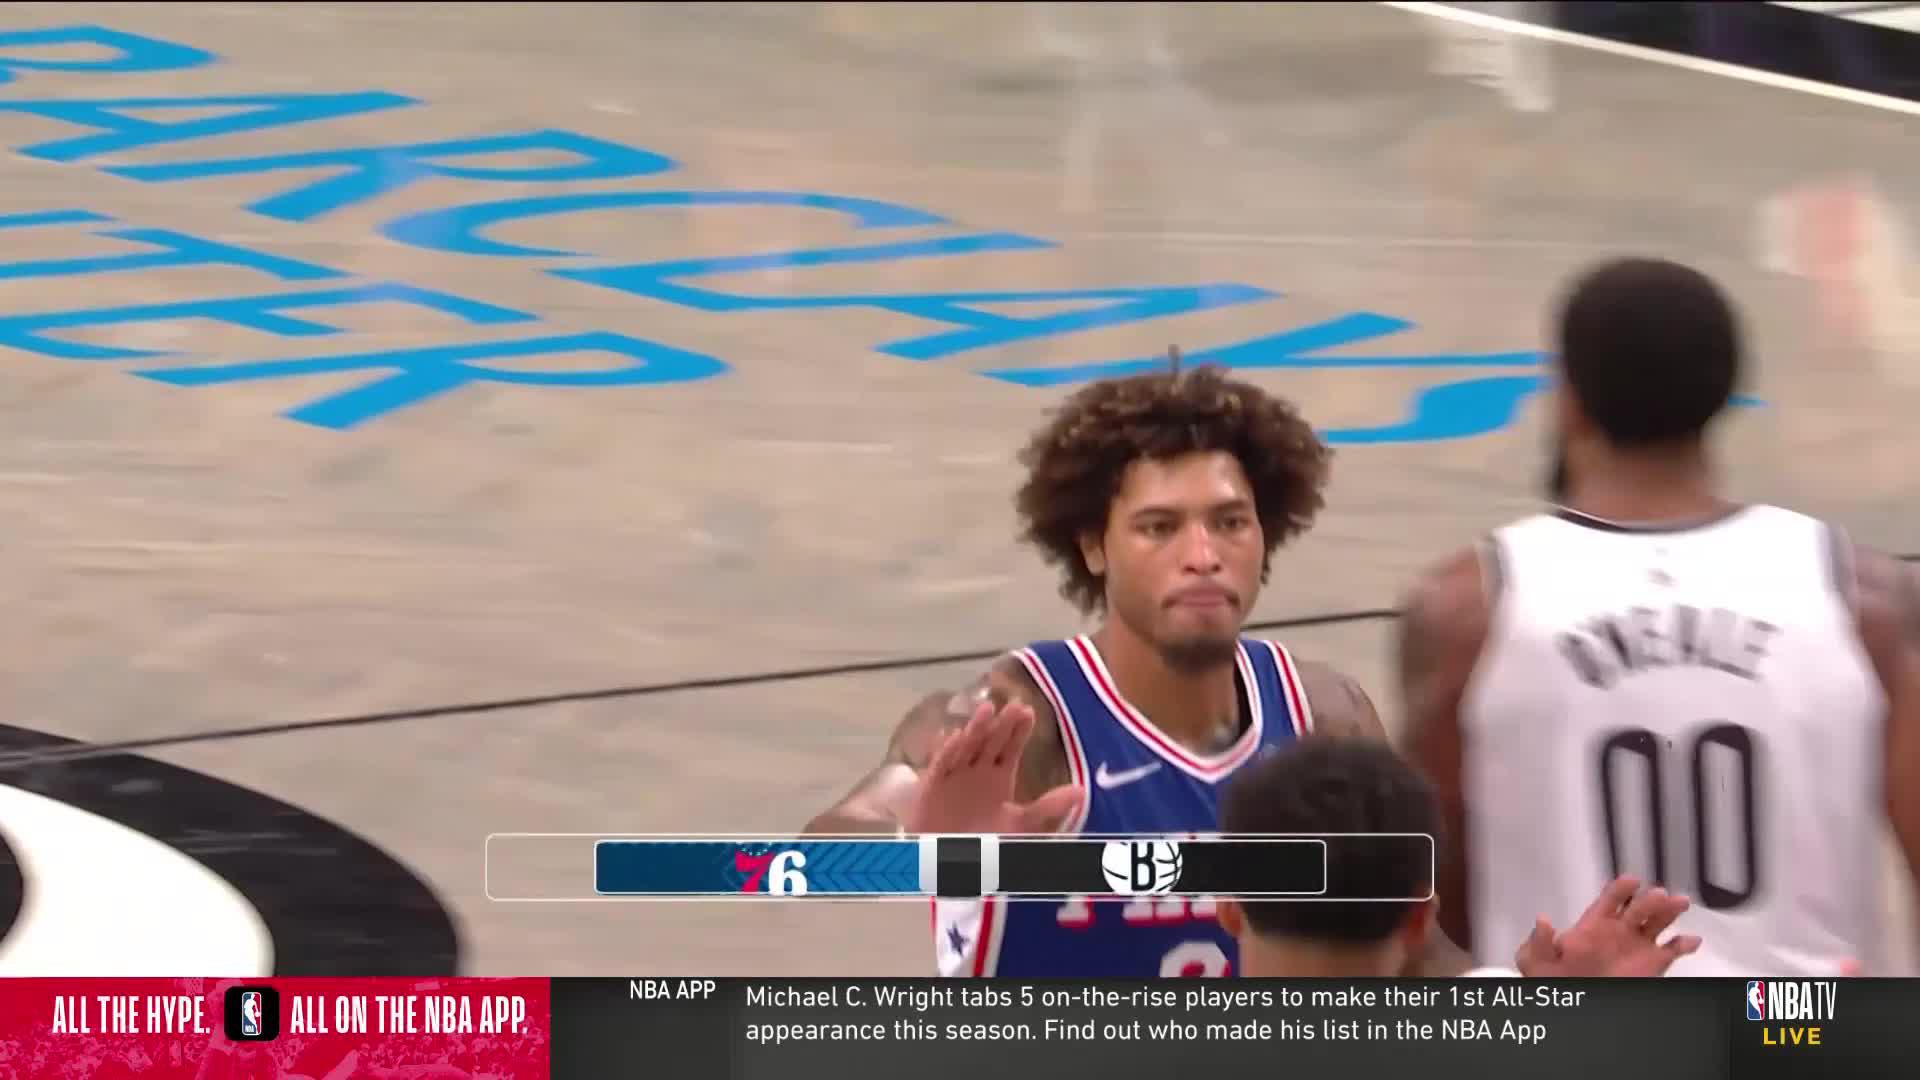 Player Snapshot: Kelly Oubre Jr.